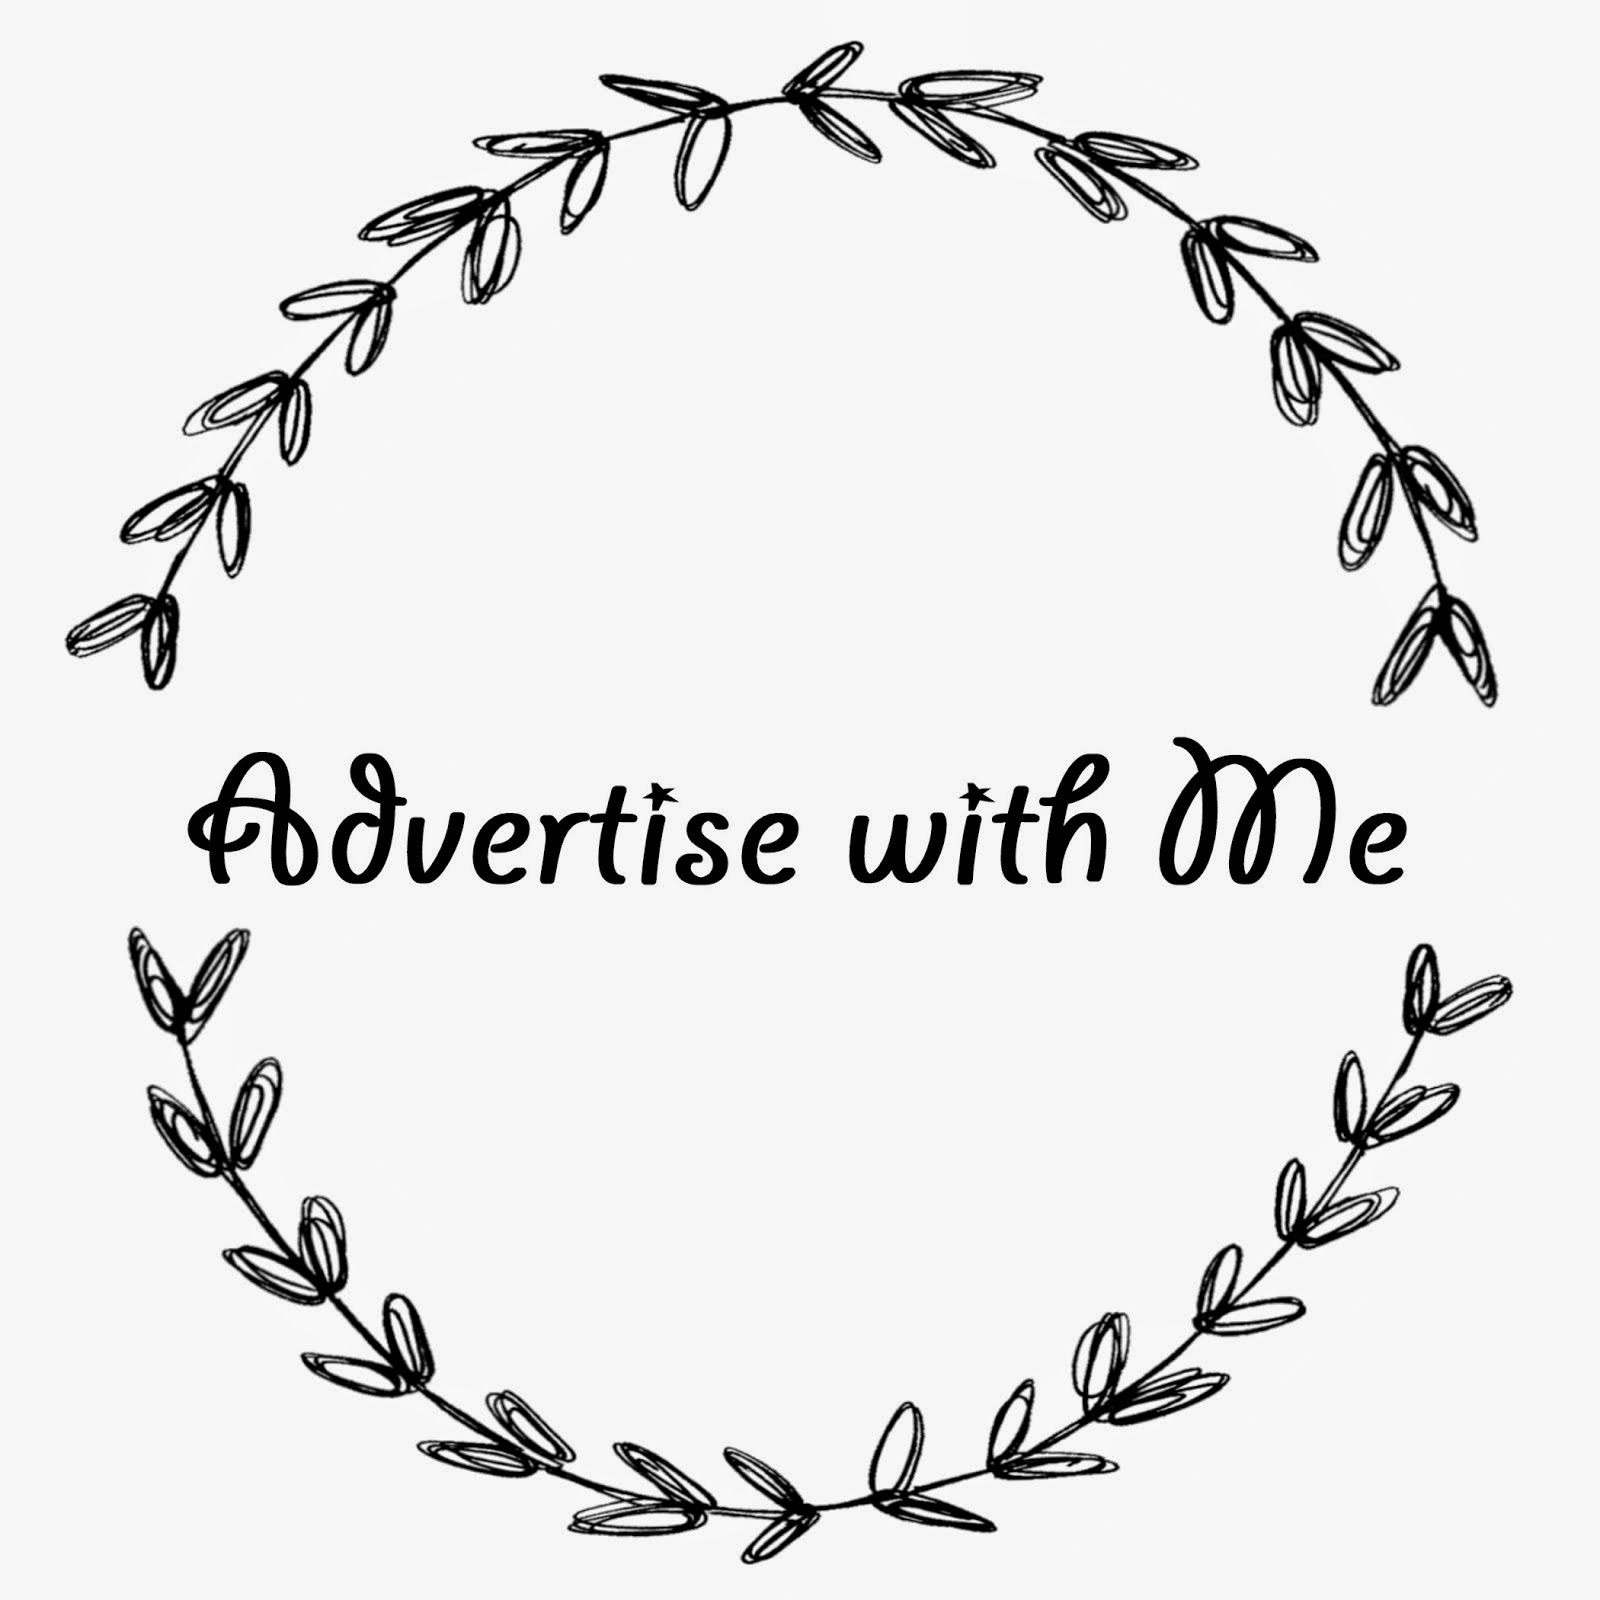 Advertise with Me